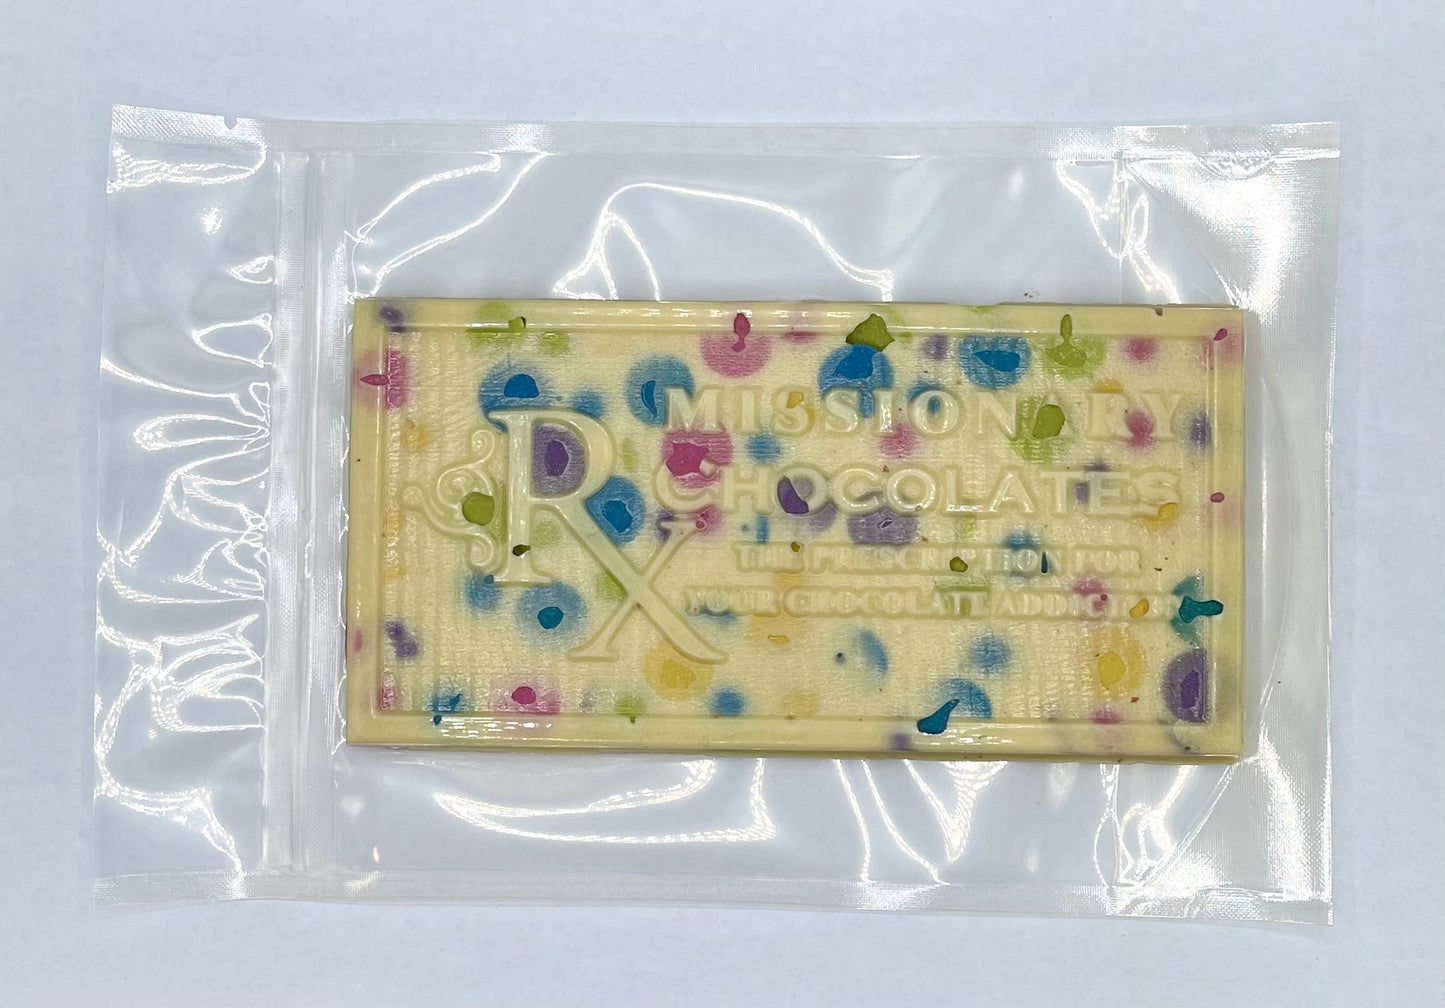 White Chocolate Bars with Fun Inclusions